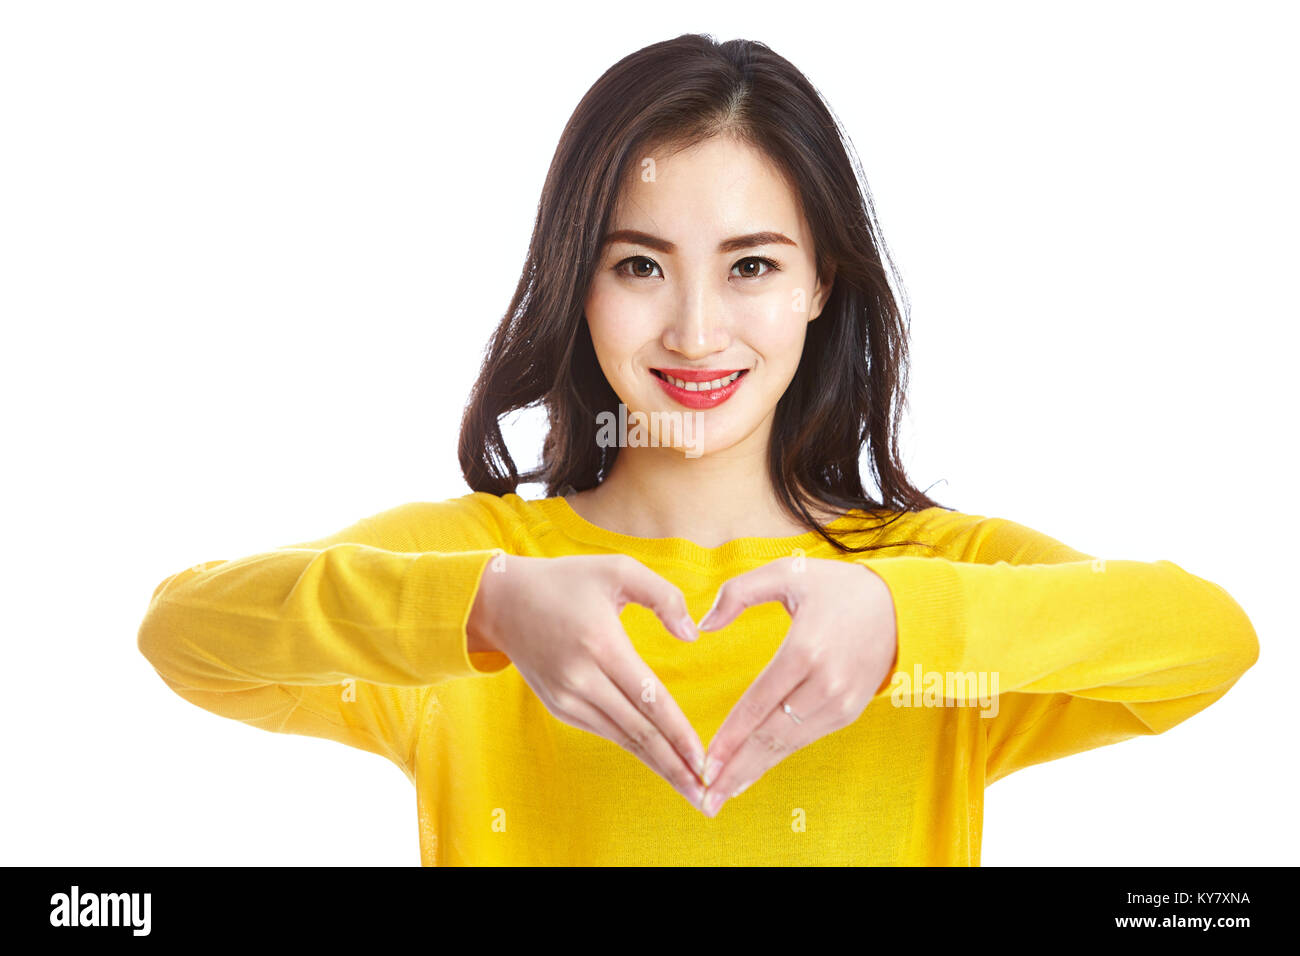 studio shot of a young and beautiful asian woman forming a heart shape with hands, looking at camera smiing, isolated on white background. Stock Photo